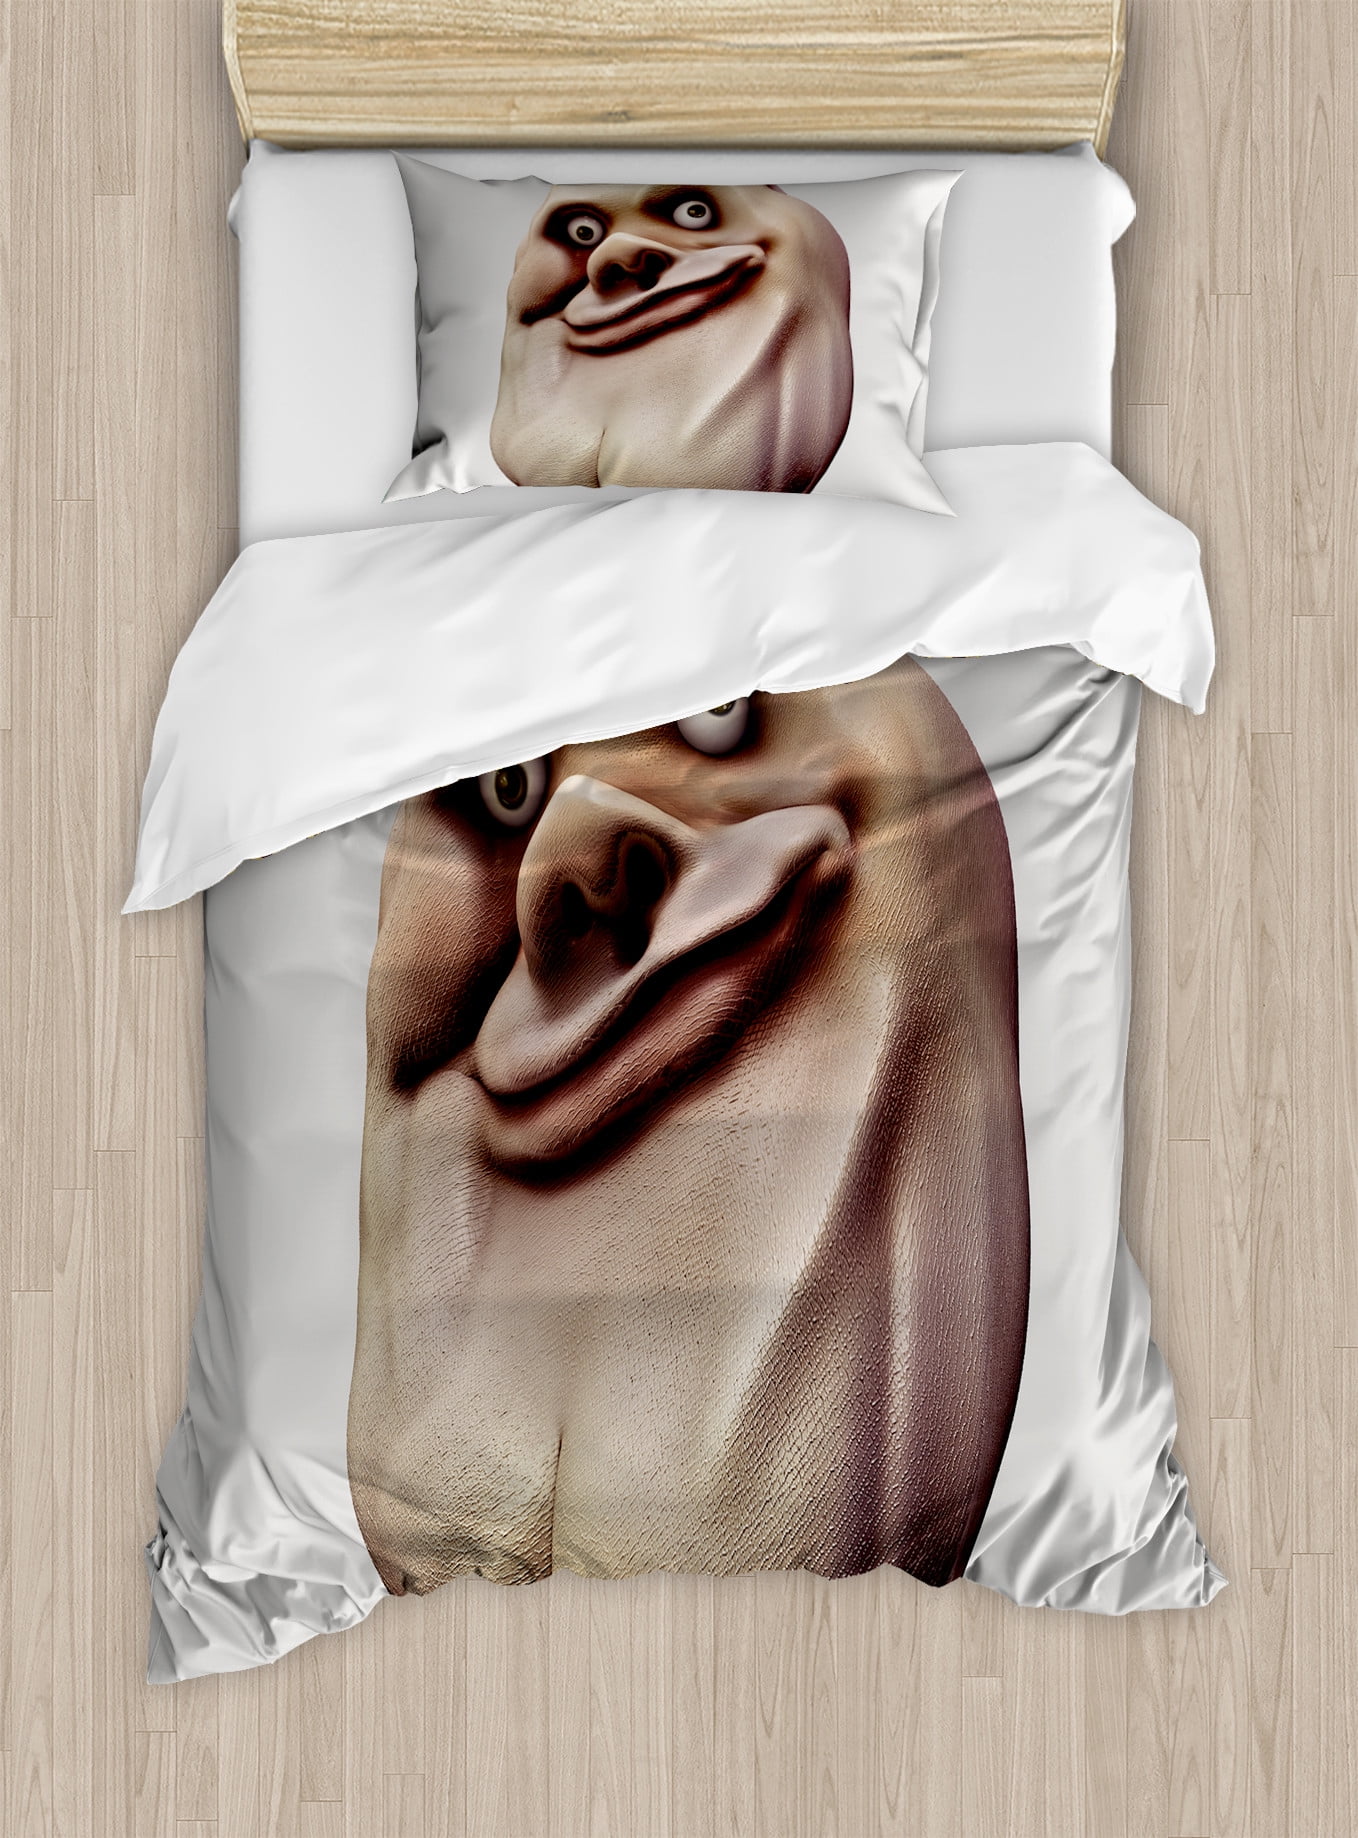 Twin Size Fitted Sheet,Grumpy Internet Troll Face with Trippy